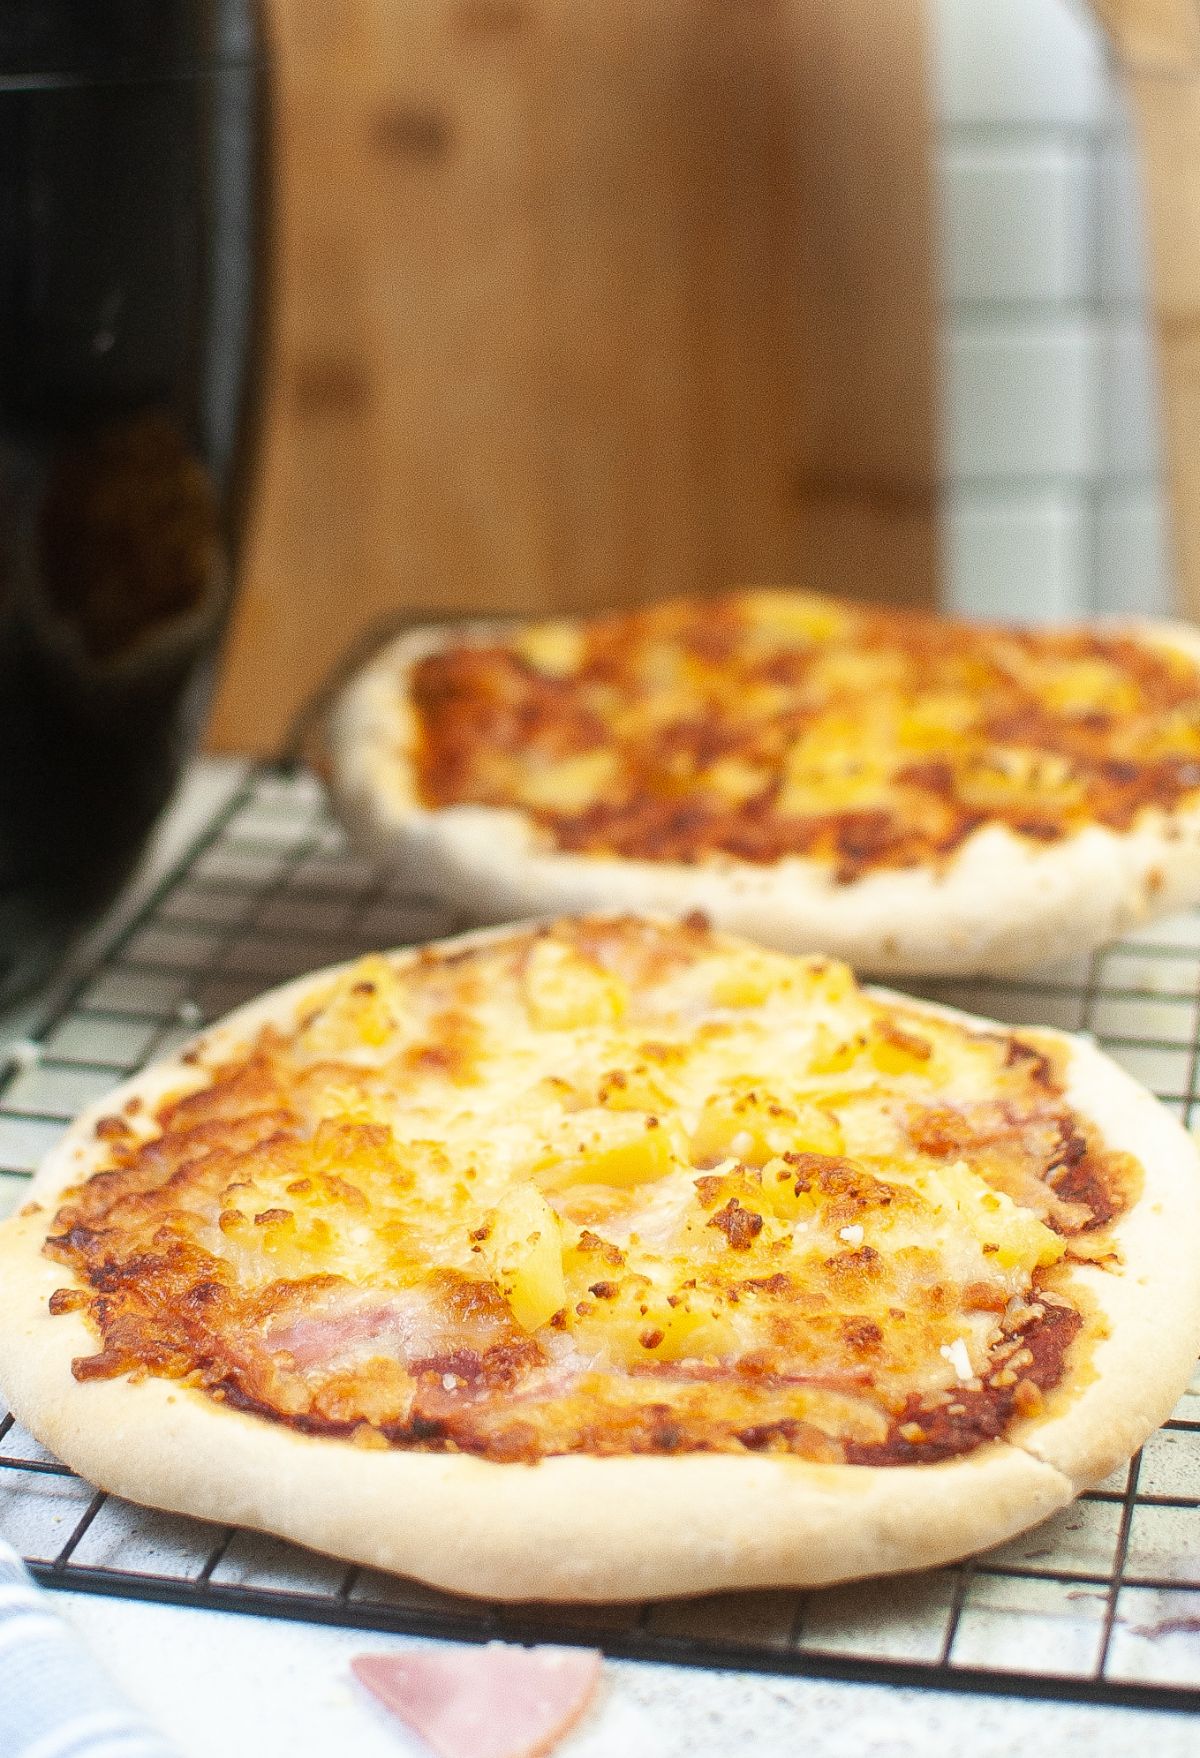 Two Blackstone pizzas on a cooling rack.